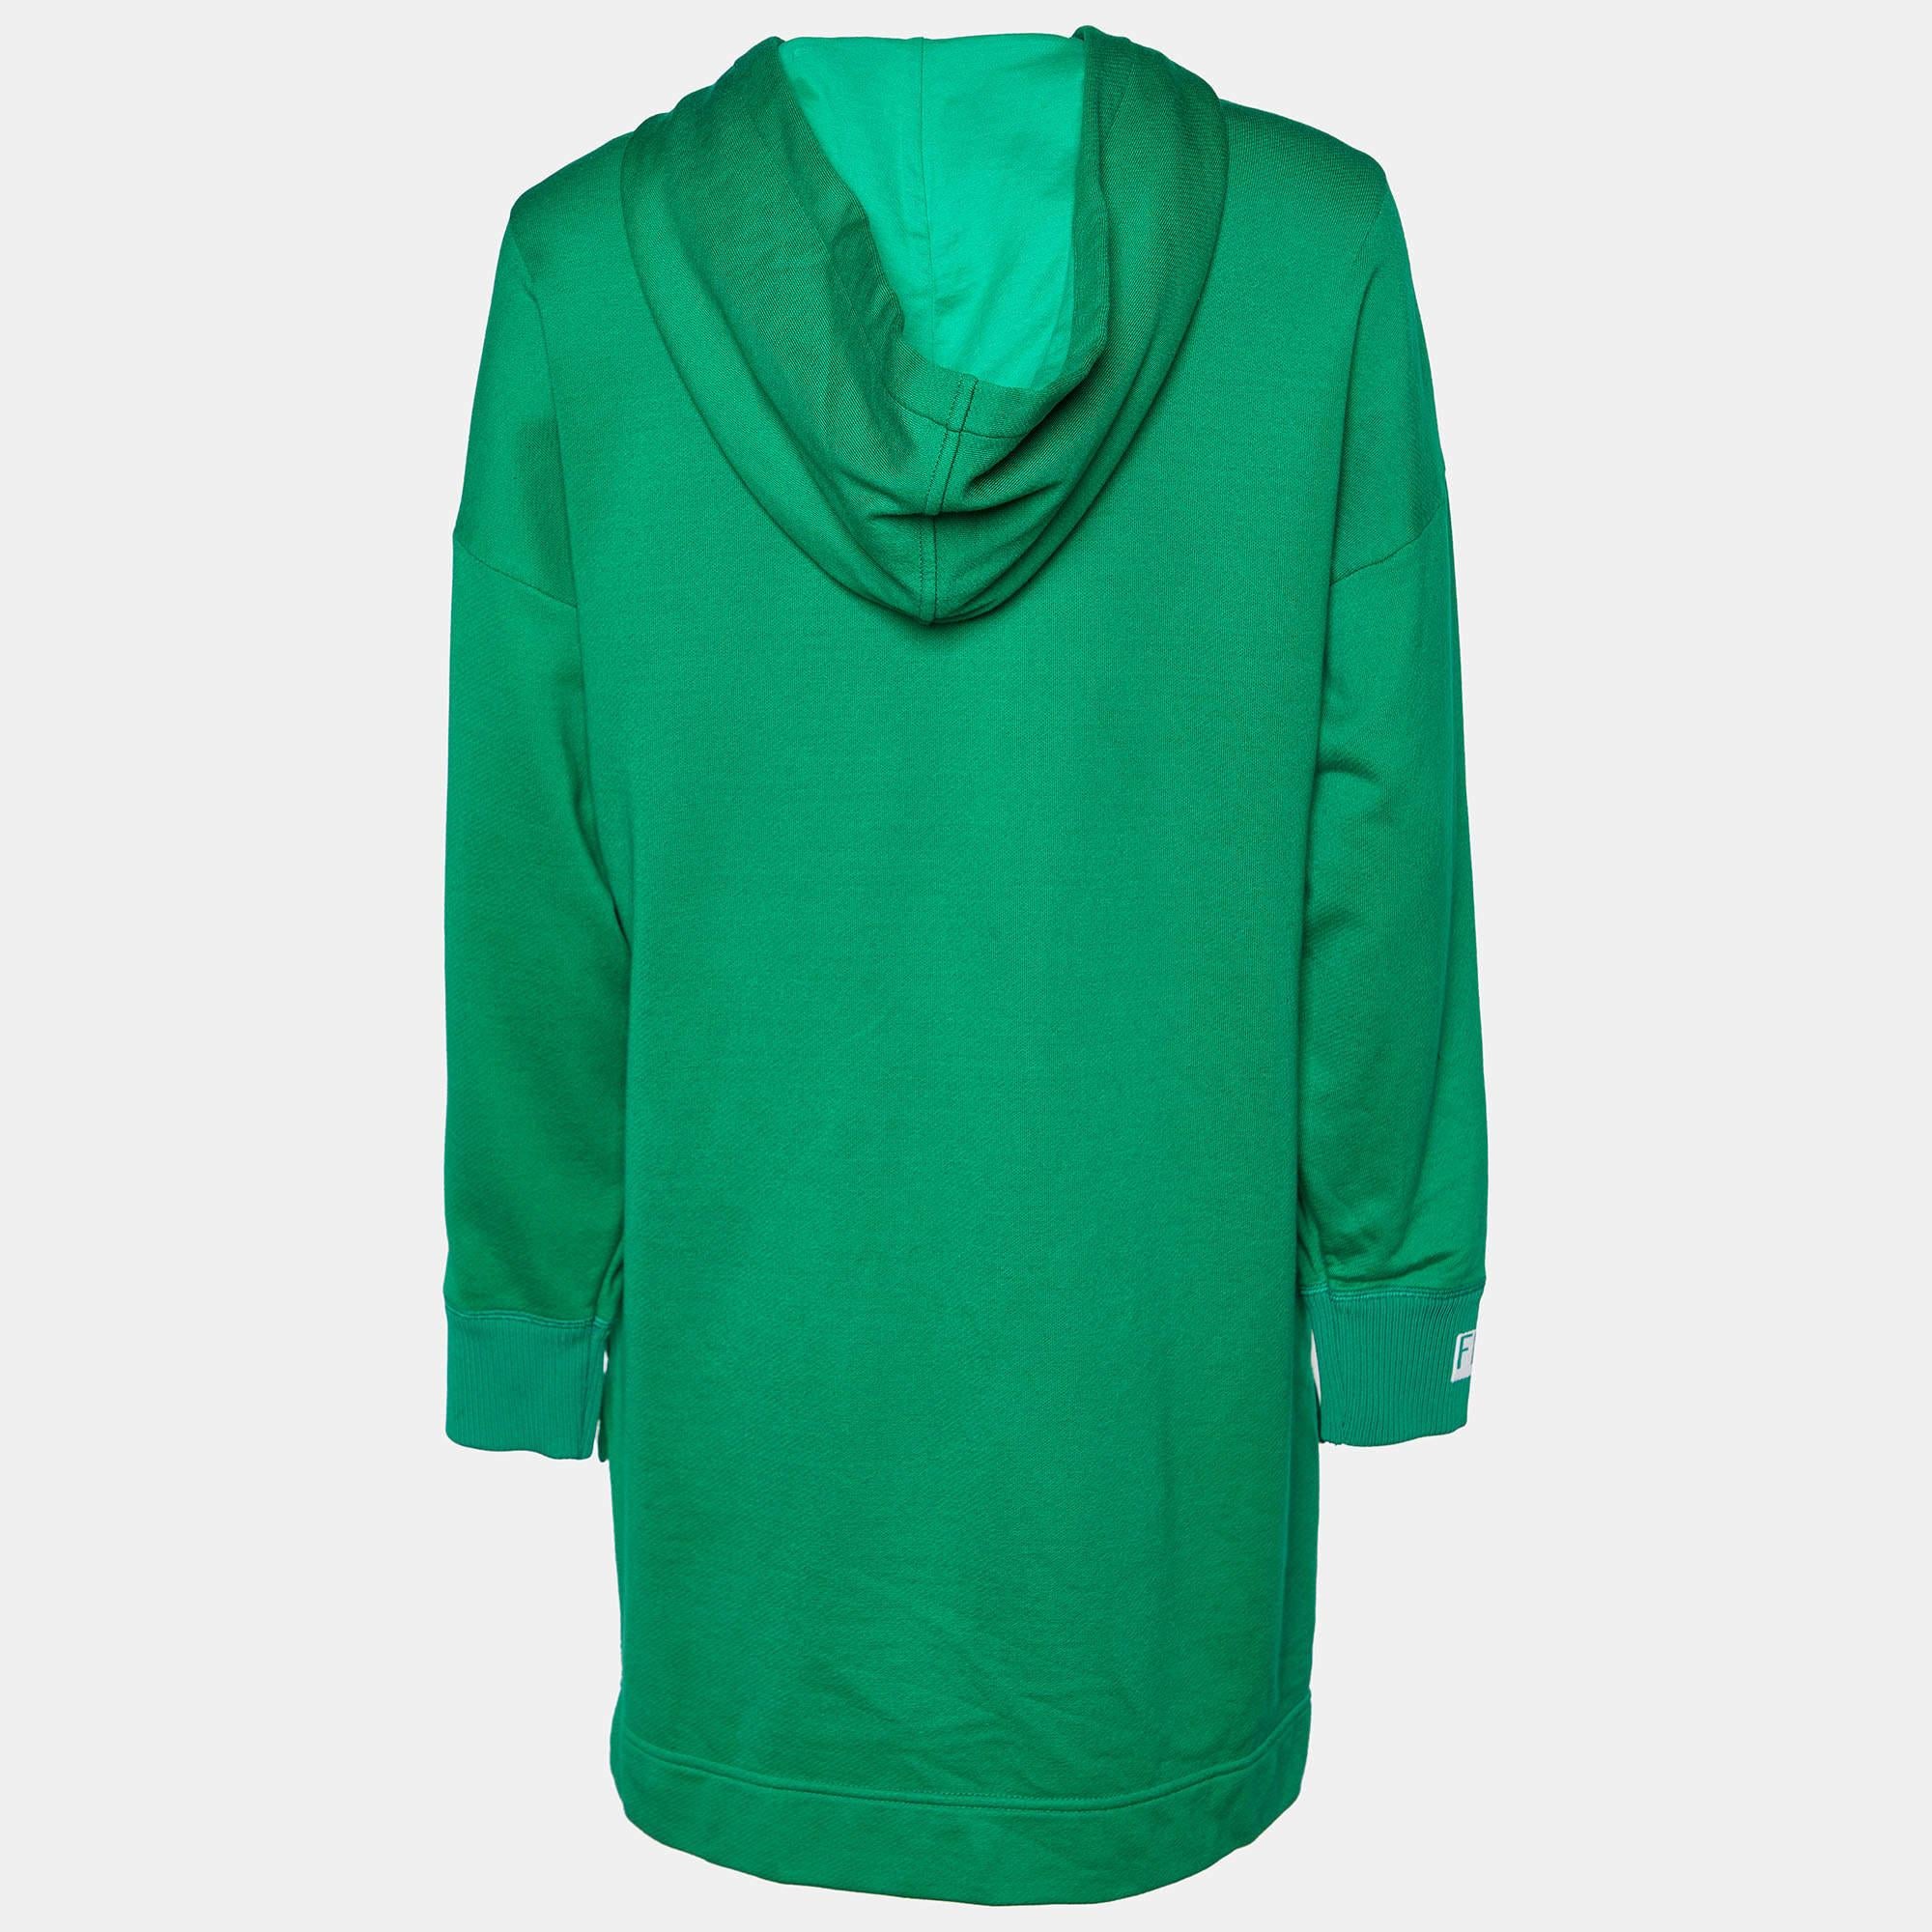 The Fendi sweatshirt is a stylish and unique piece. Made from comfortable cotton knit, it features a hood and an eye-catching green logo embellishment. The asymmetric hem adds a modern touch to this cozy sweatshirt, making it a fashionable choice